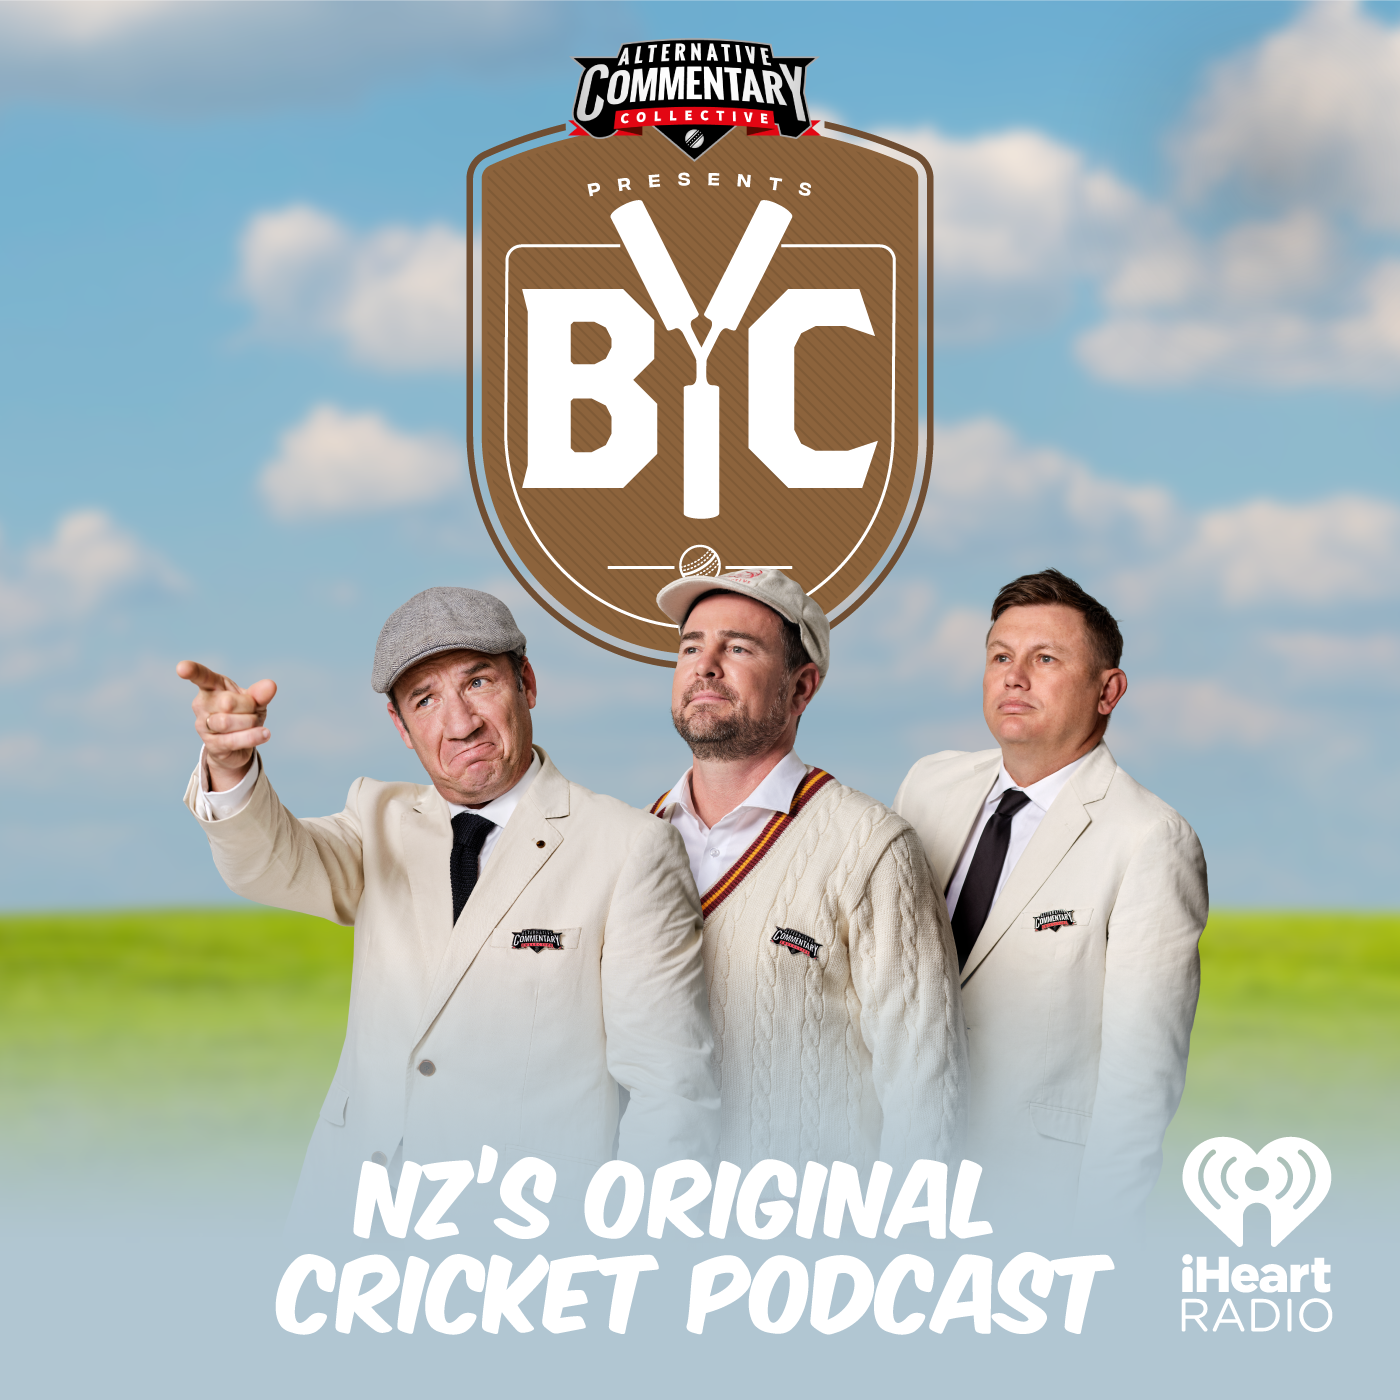 "NZ Vs Eng 2nd Test Special - Notes From The Basin: Day 1"